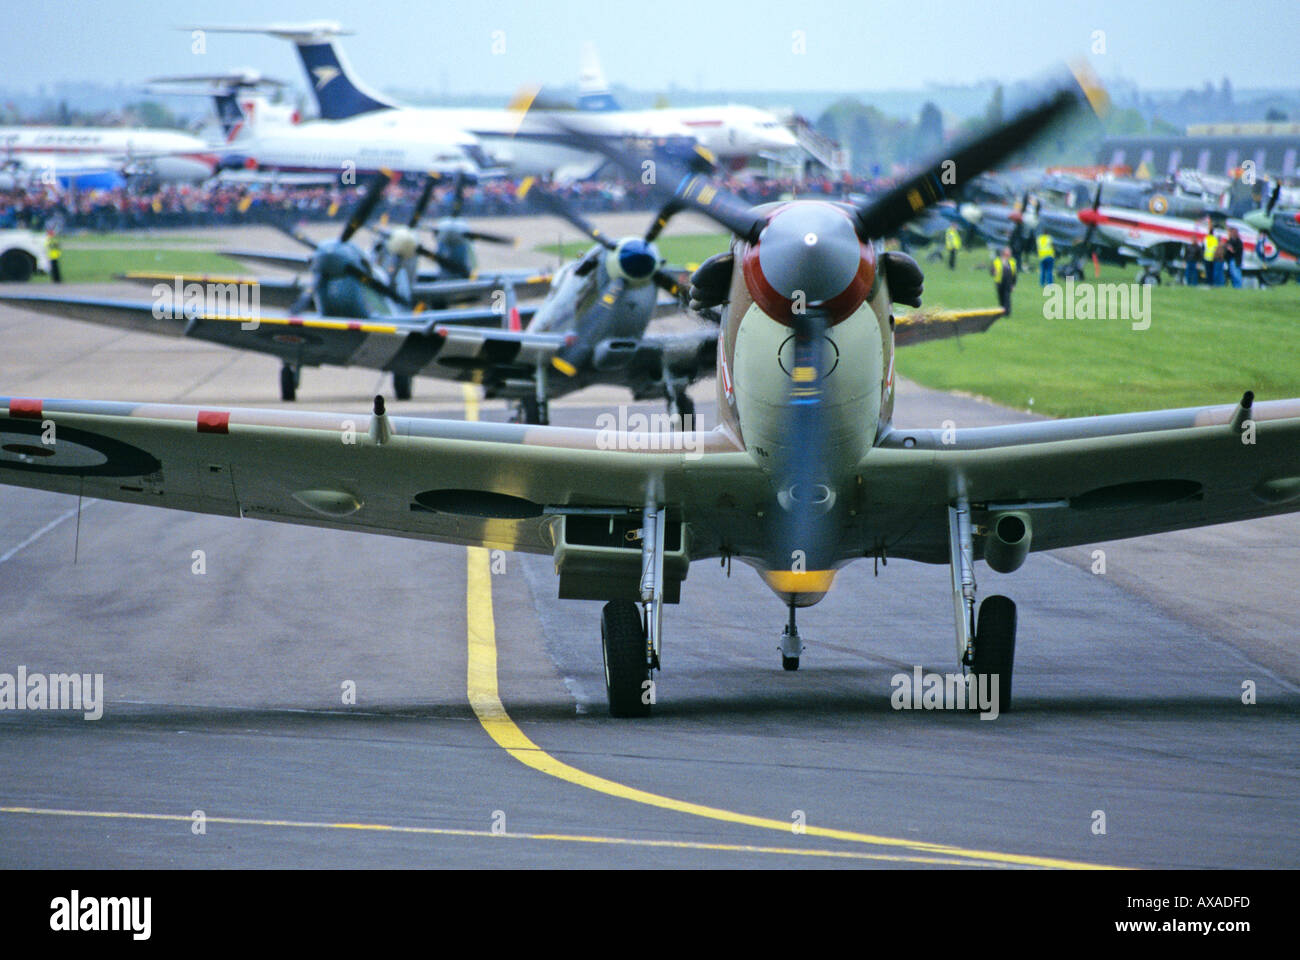 Spitfires at Duxford Airfield Cambridgeshire England Stock Photo